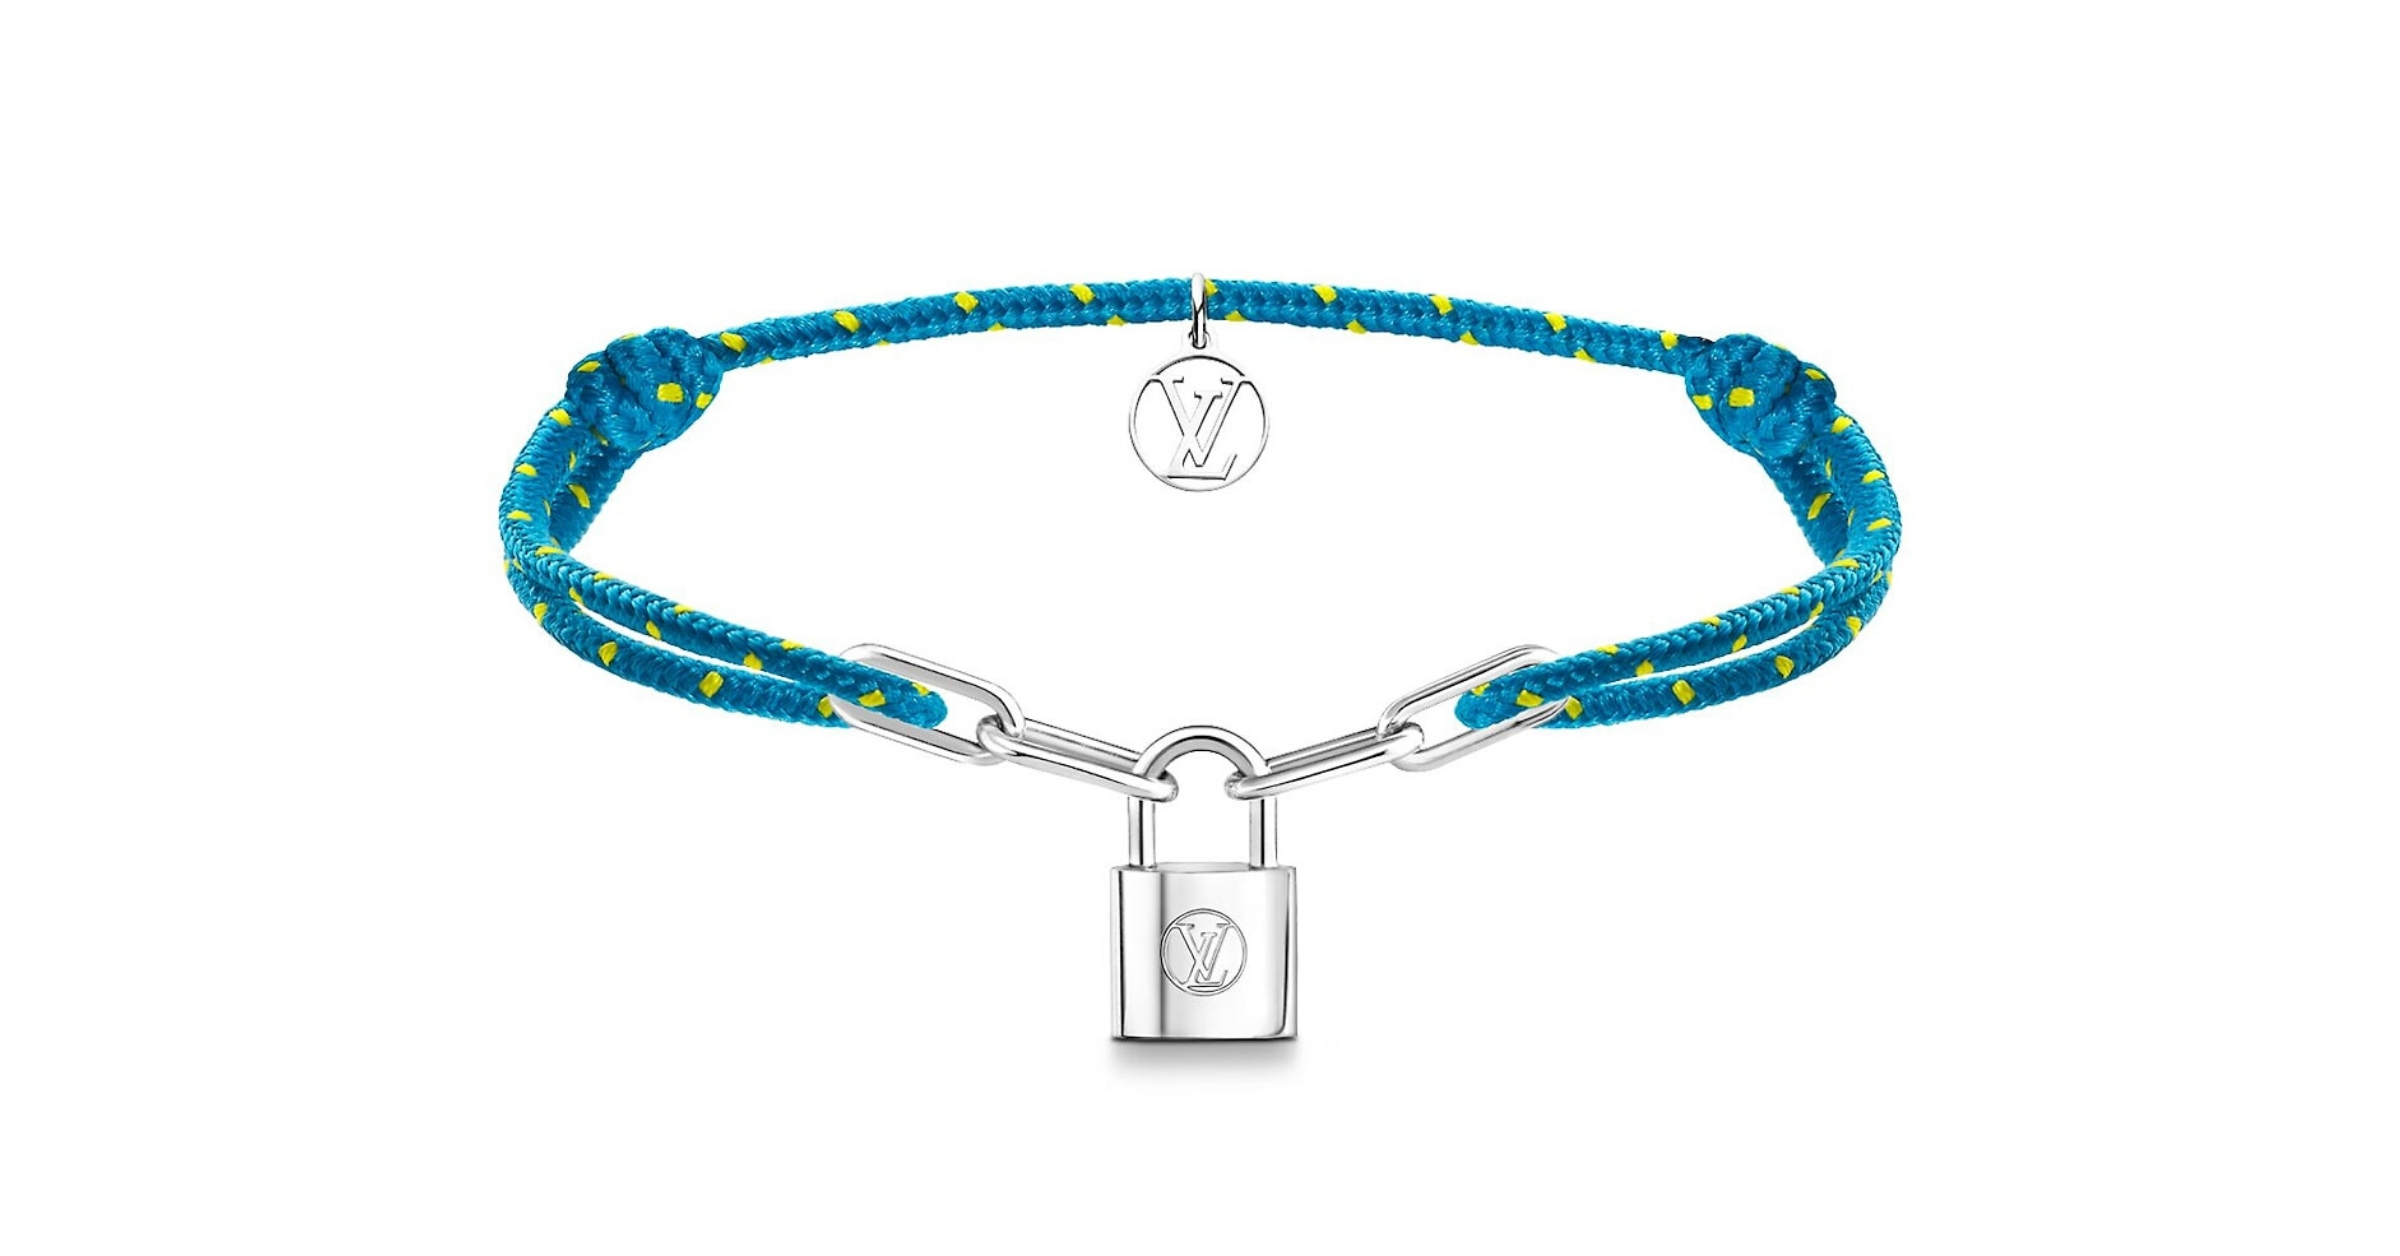 Louis Vuitton Silver Lockit Bracelet Supports Children in Need | Trnds